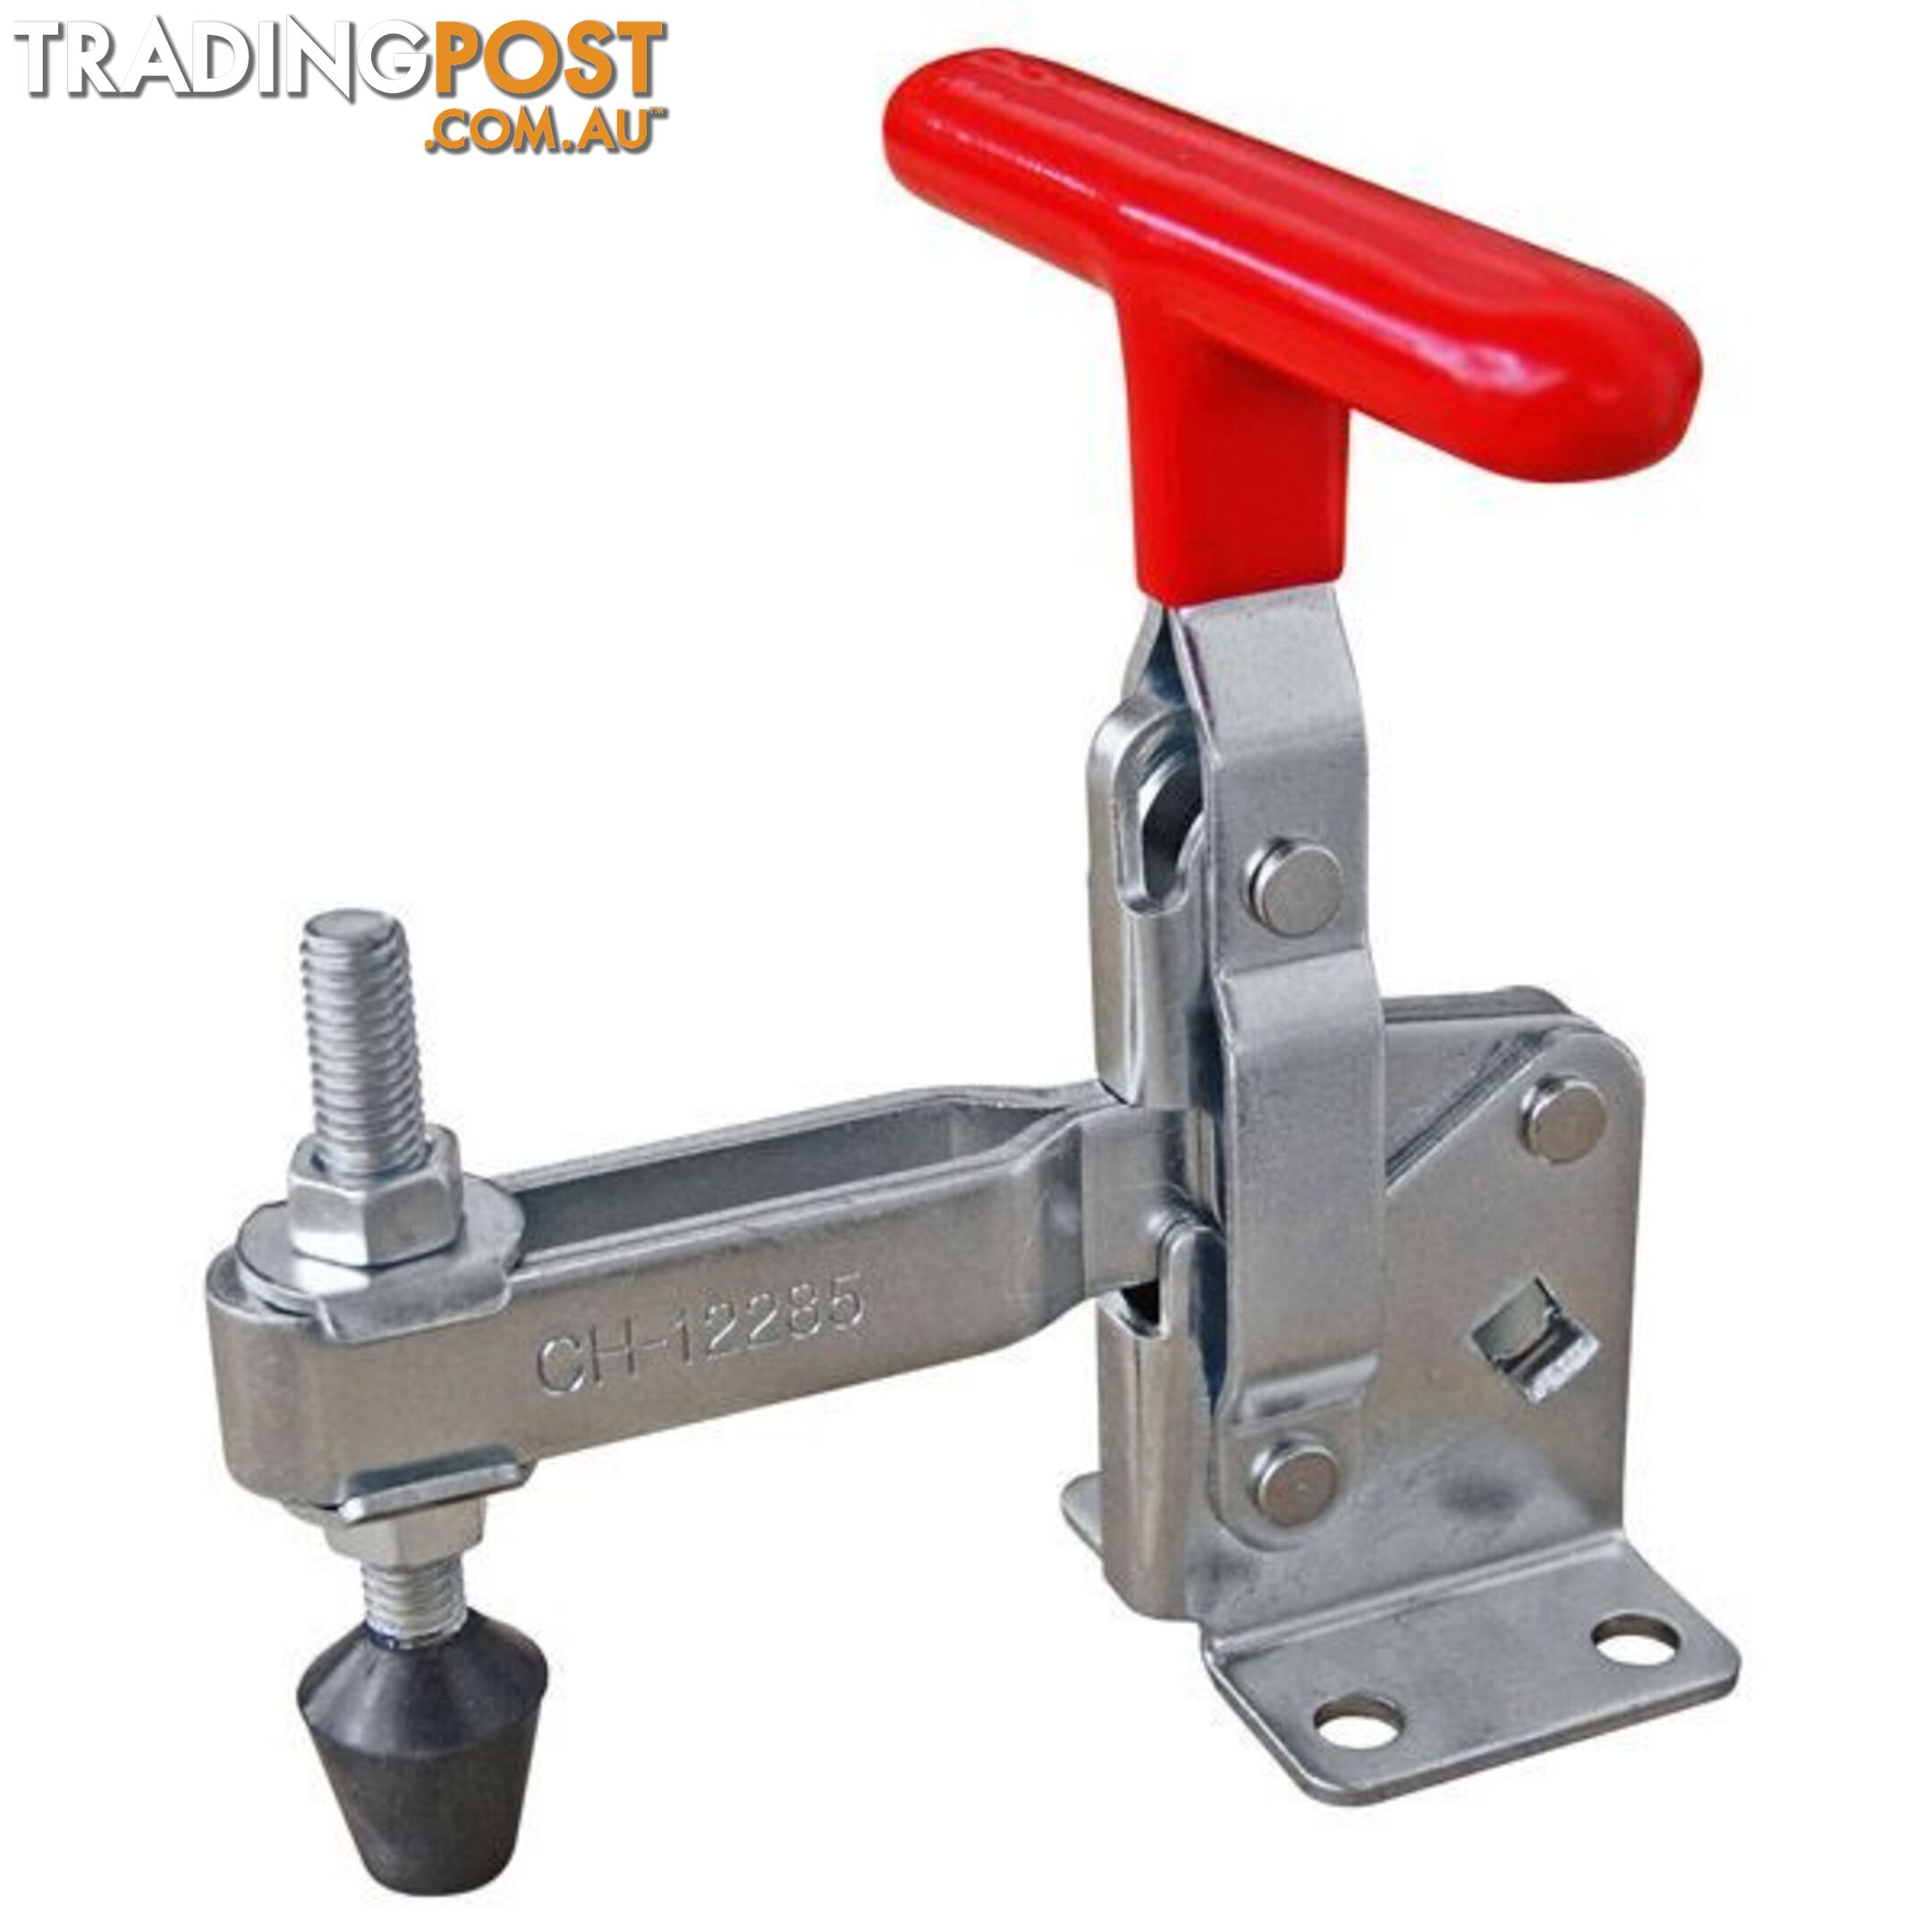 Toggle Clamp Vertical Flanged Base Tee Handle 340kg Cap 85.1mm Reach ITM CH-12285